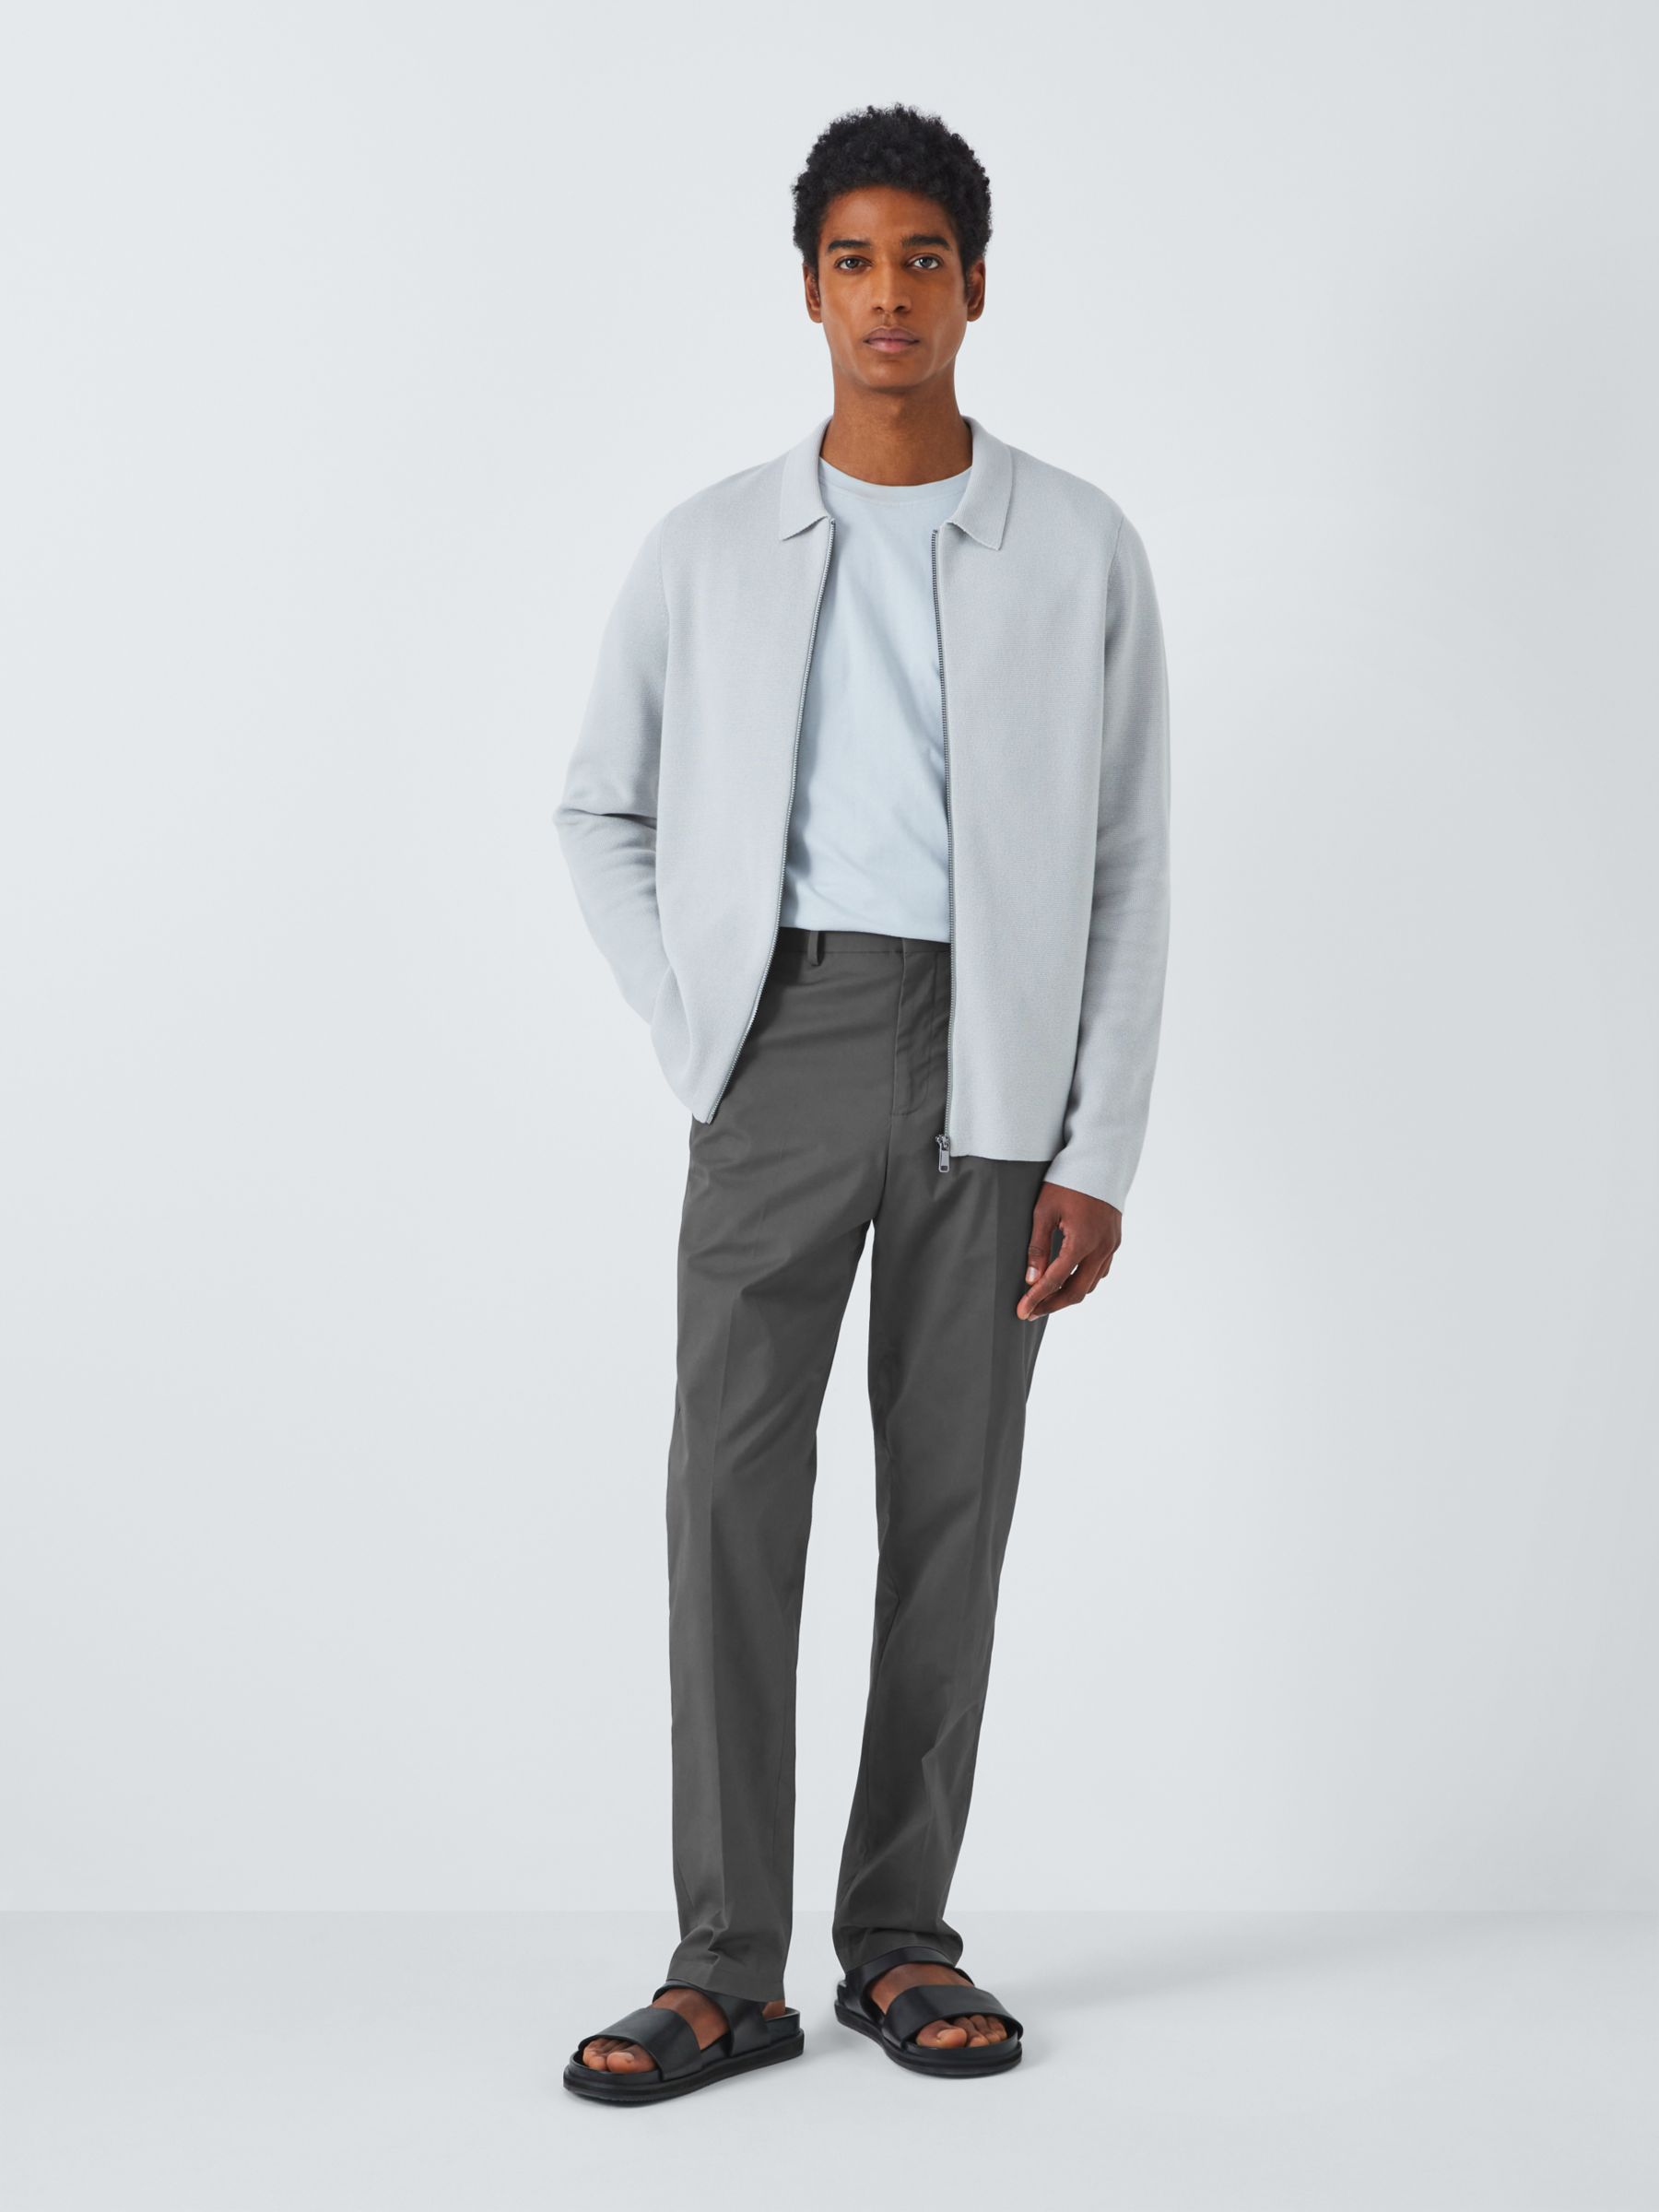 Buy Kin Straight Fit Chino Trousers Online at johnlewis.com